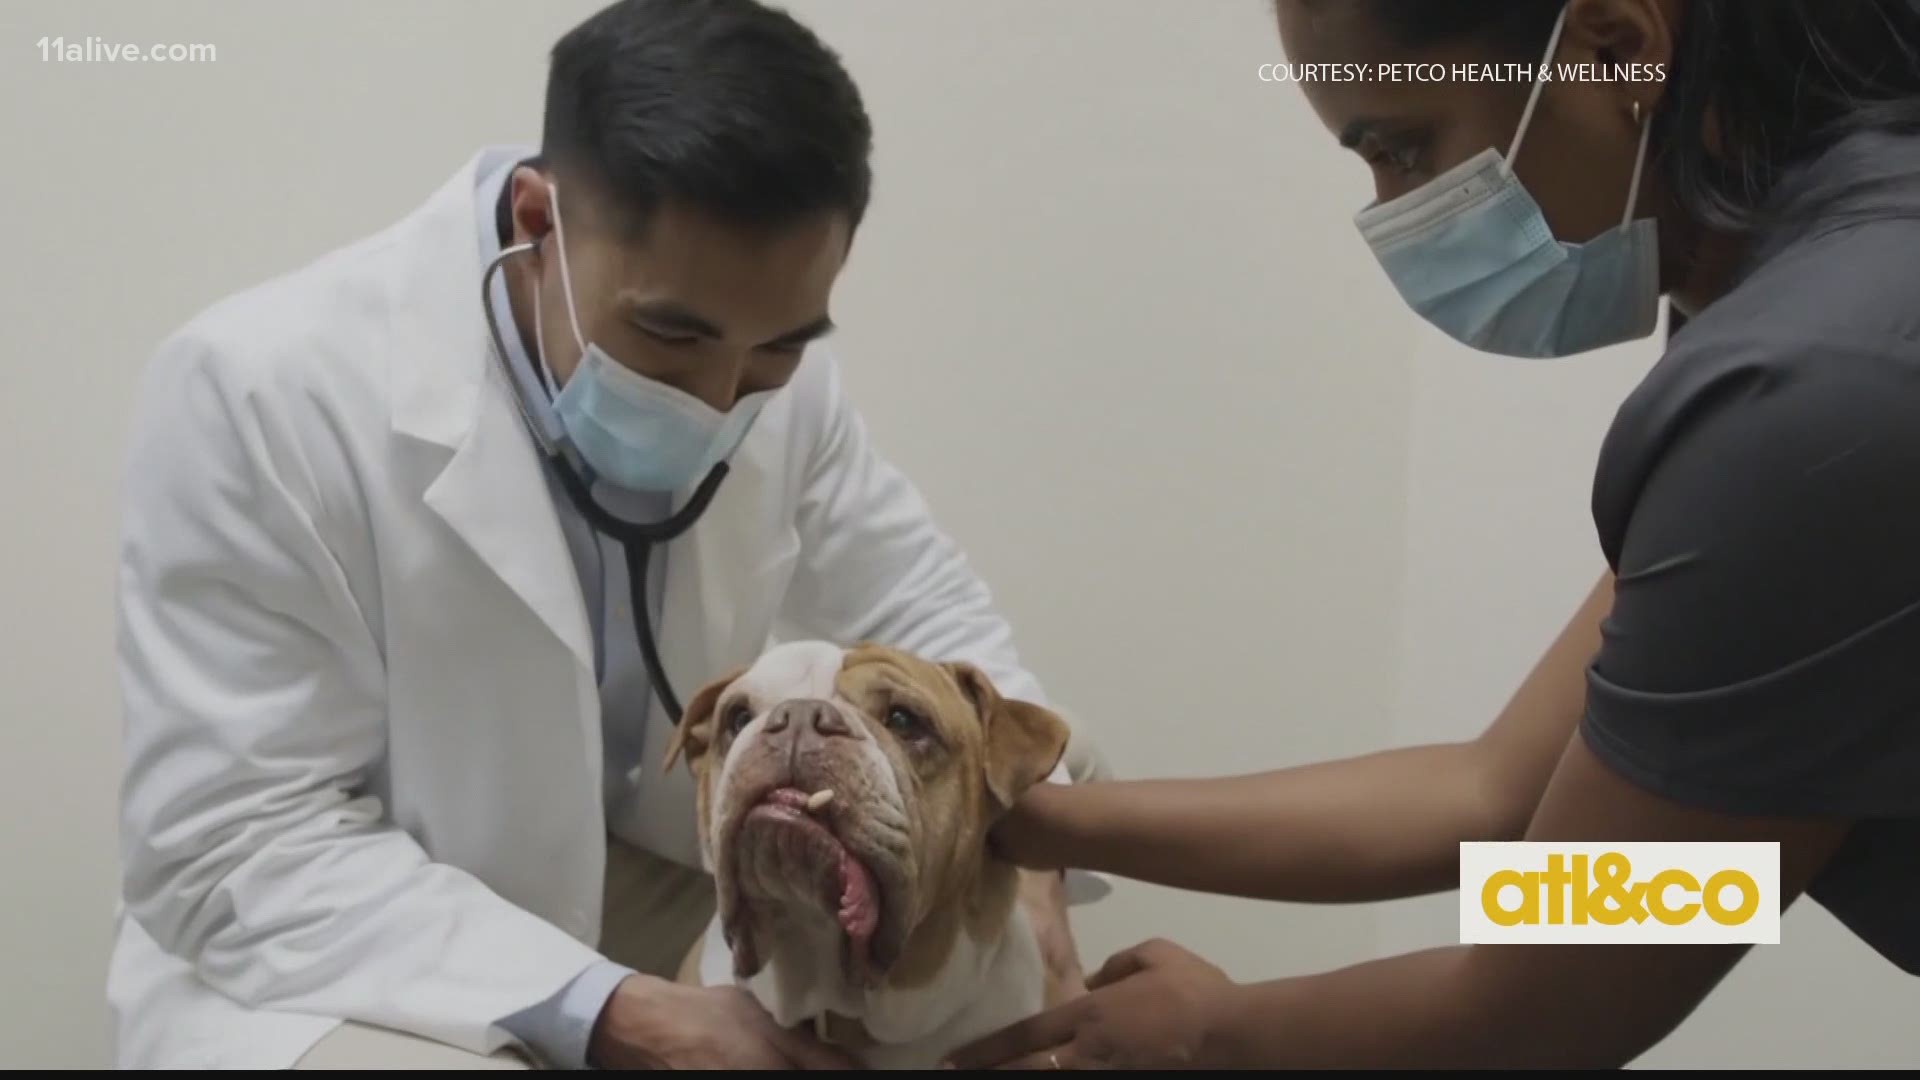 Petco shines on a light on pet cancer and the warning signs.